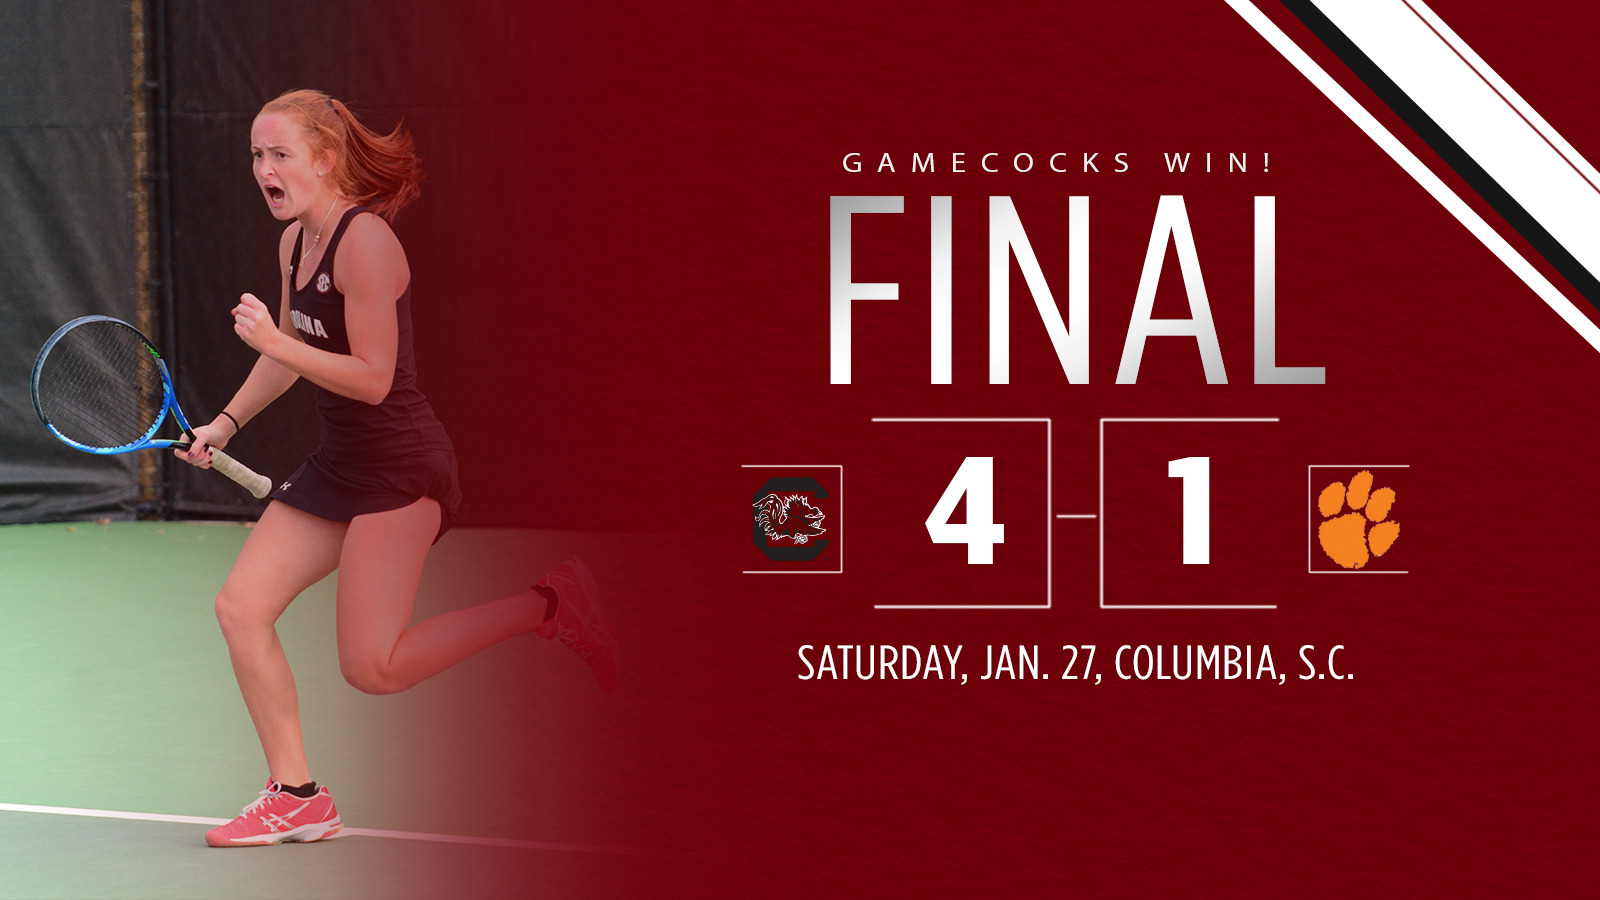 Gamecocks Advance To ITA Indoors With Win Over Clemson